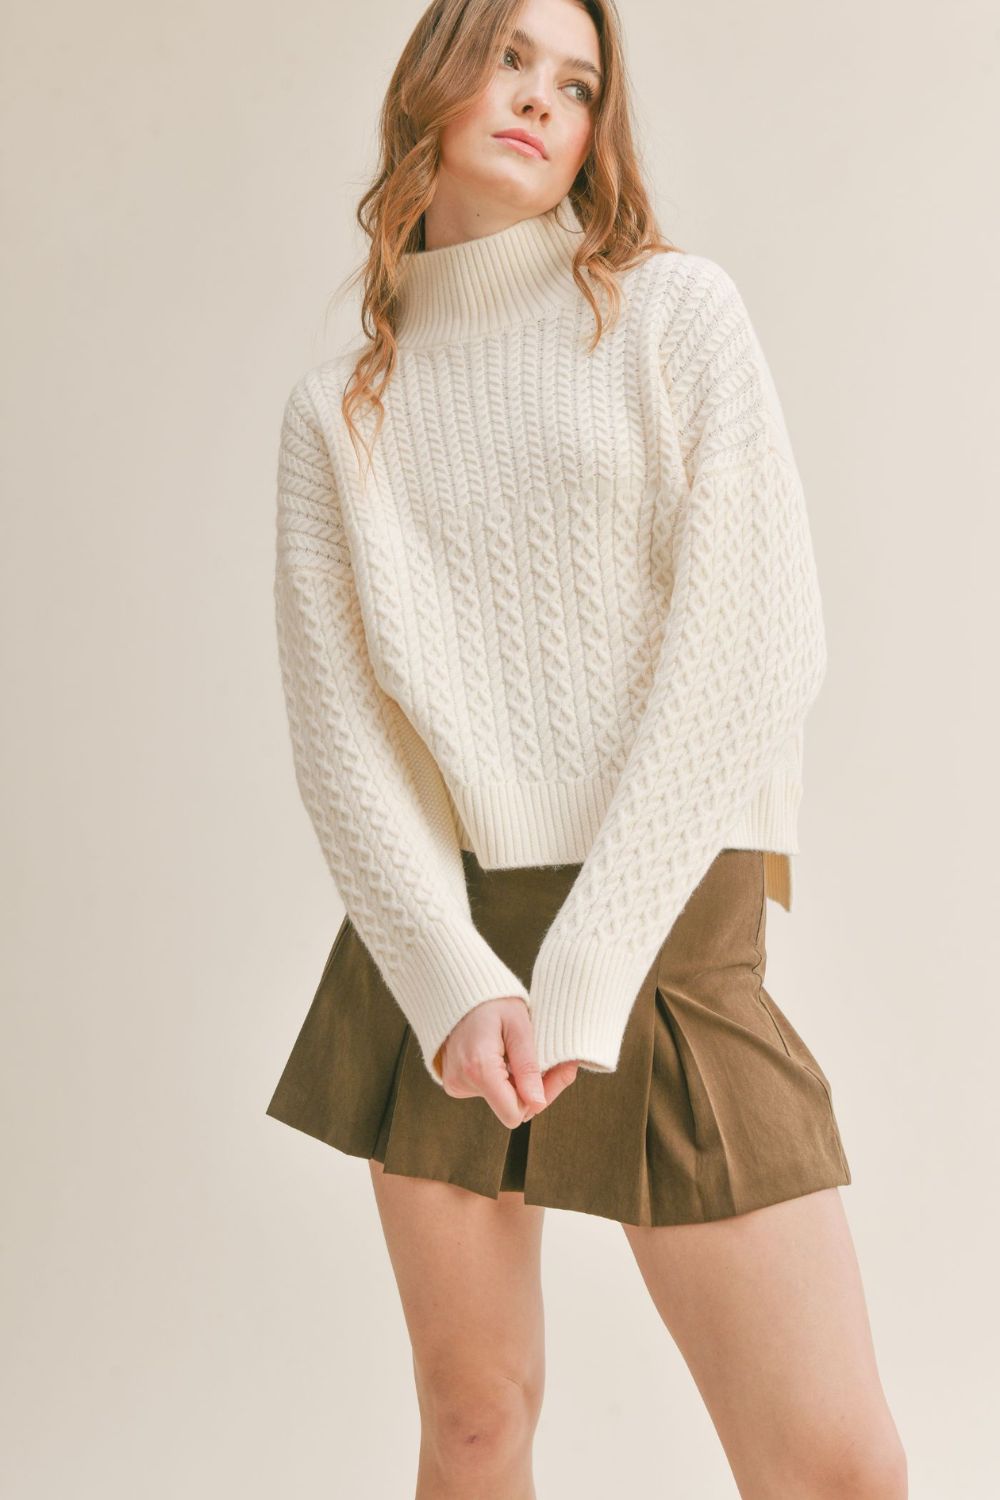 Zen Pointelle Knit Sweater in Lily by Heartloom - Blooming Daily